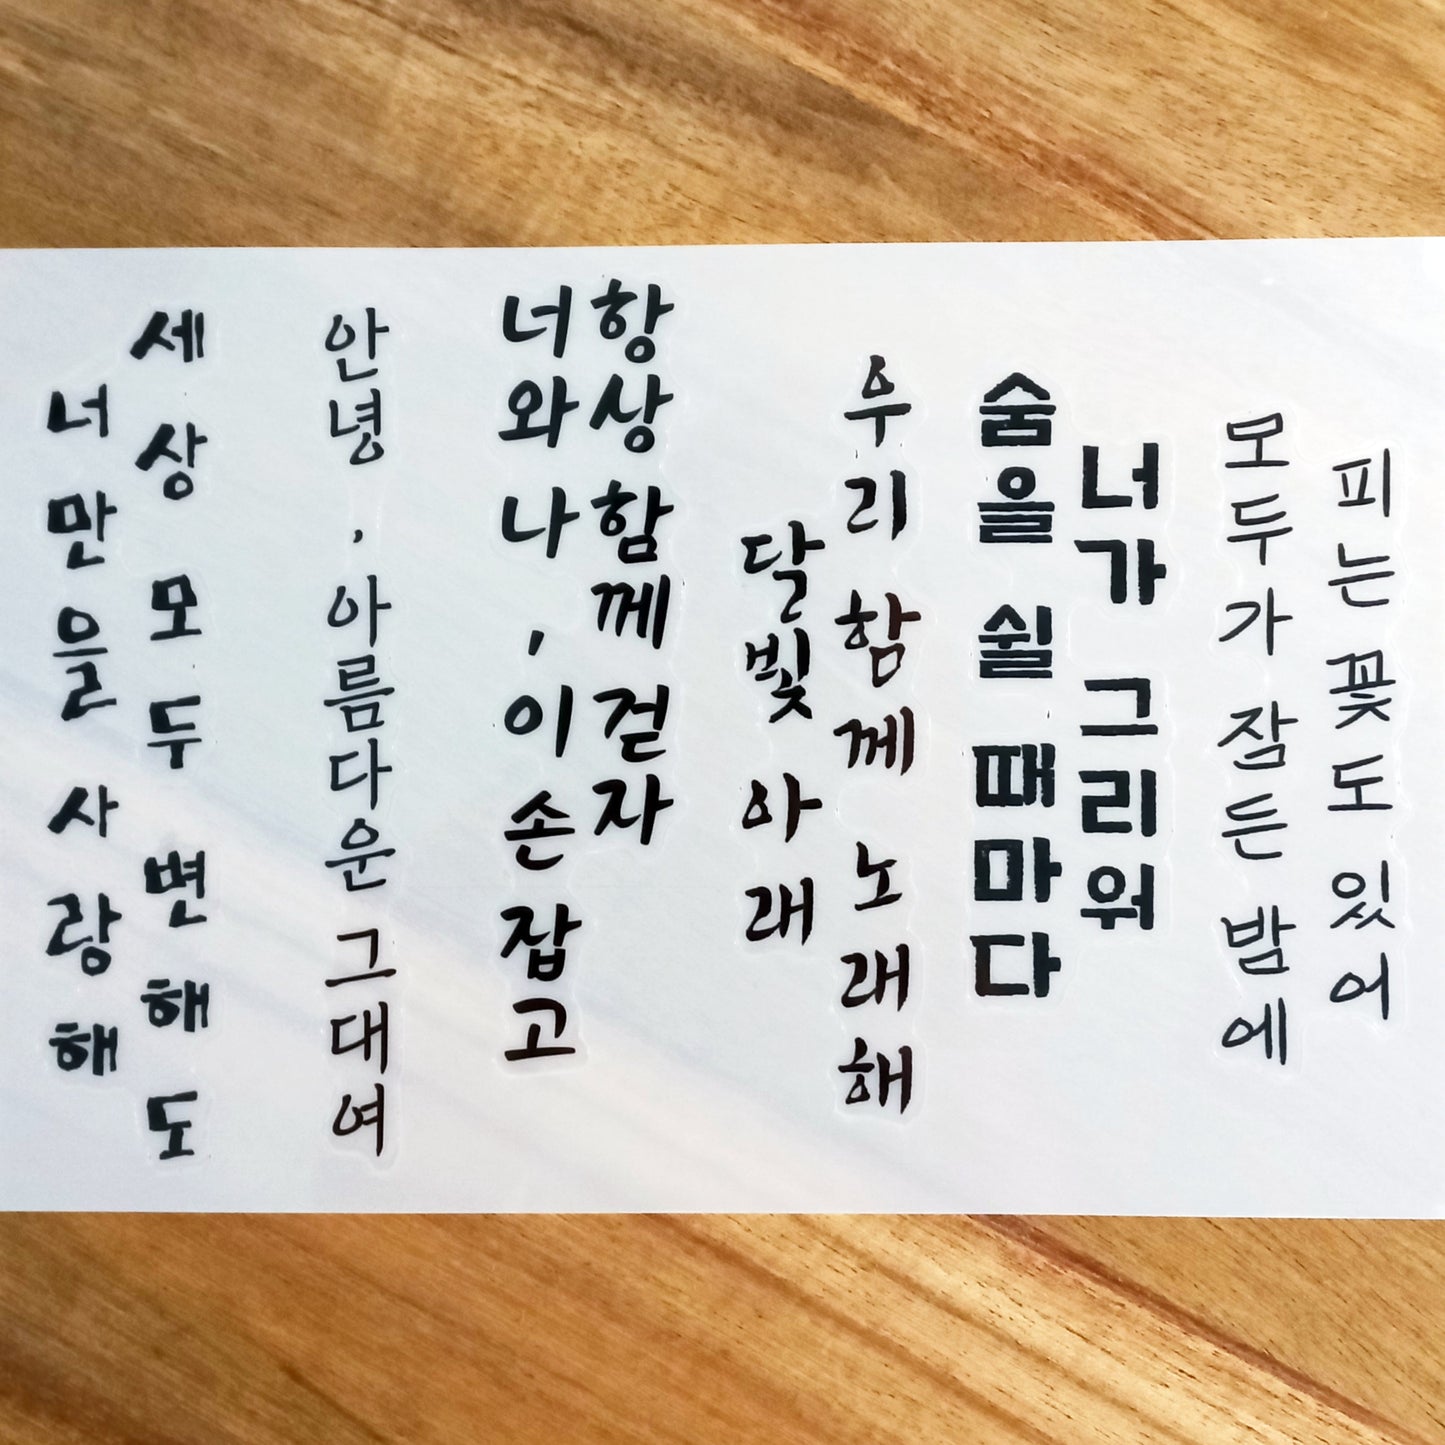 Sheet of temporary tattoos featuring assorted Hangul words and phrases in black ink with a bold, artistic font.